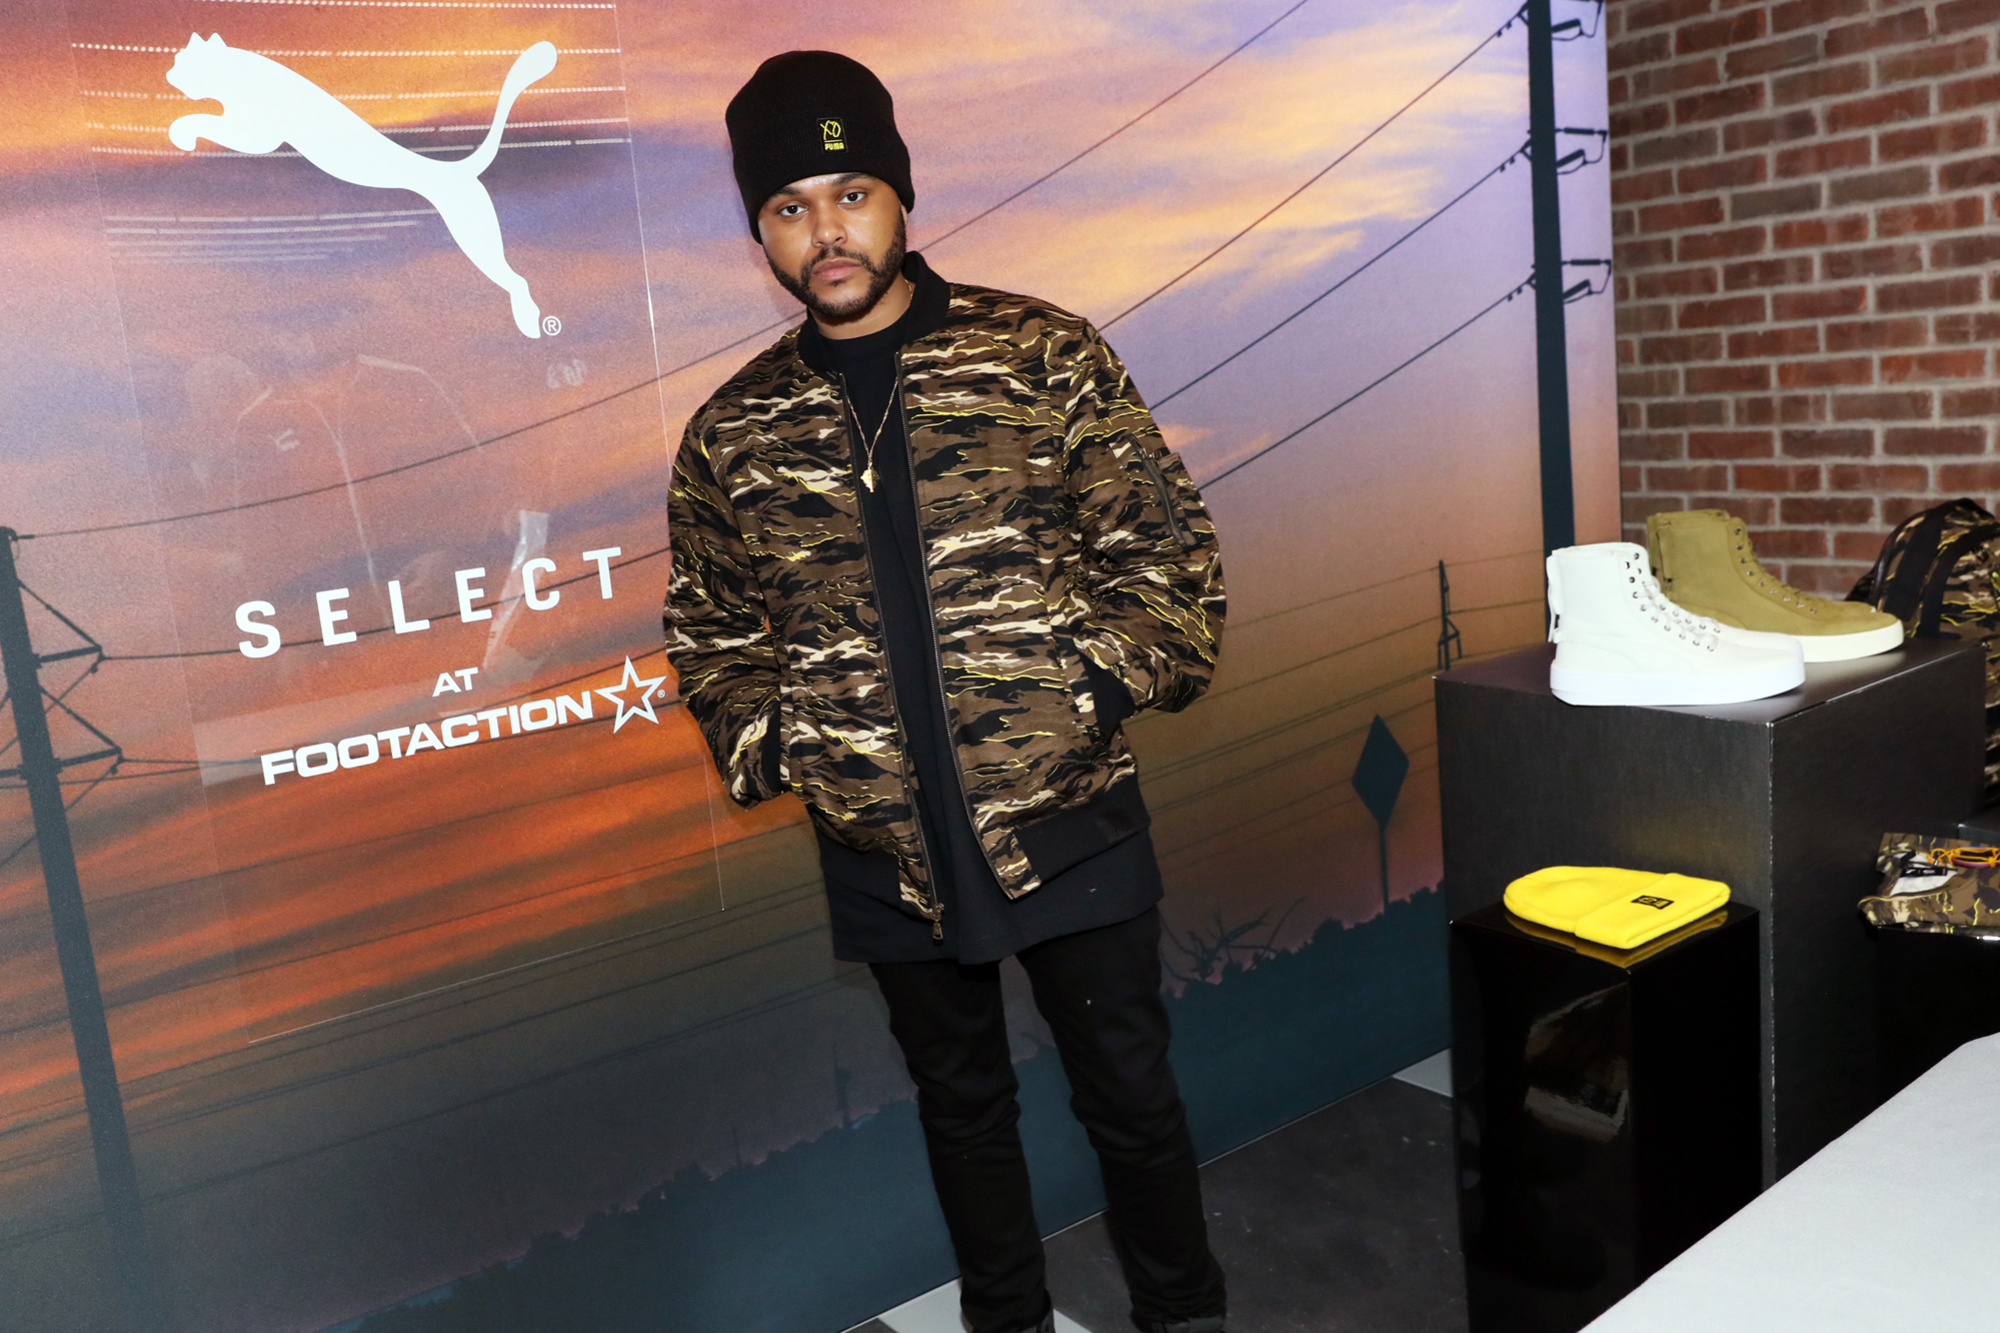 The Weeknd x Puma, Getty Images